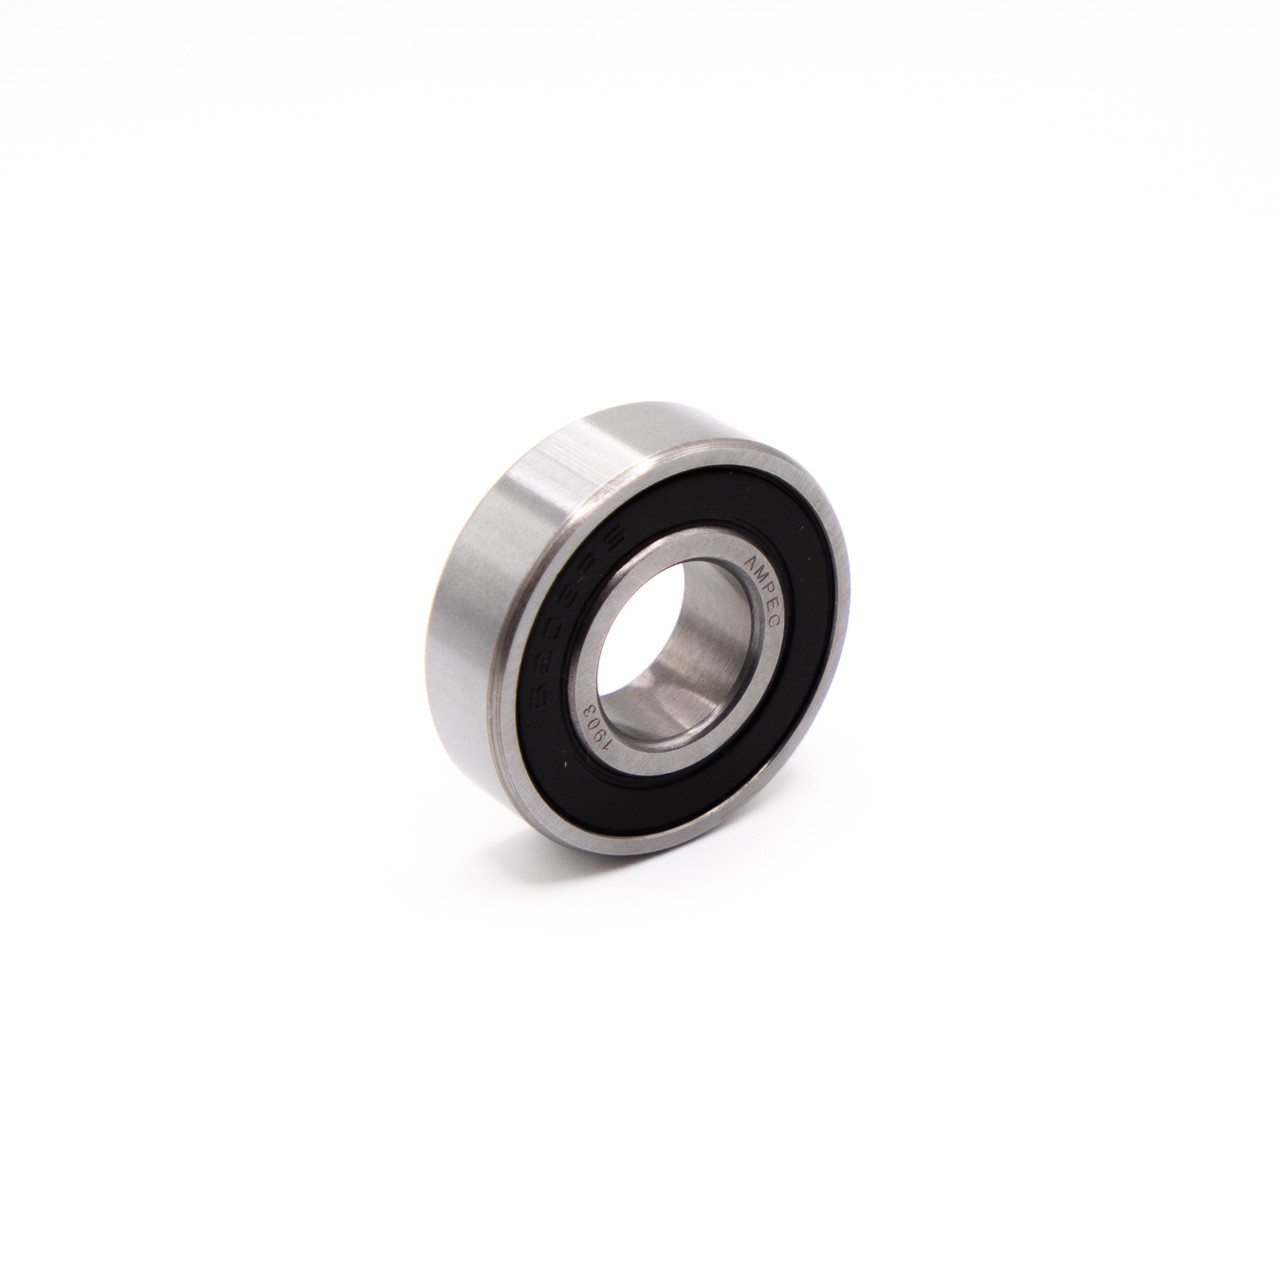 SR6-2RS Stainless Steel Miniature Ball Bearing 3/8x7/8x9/32 Side View